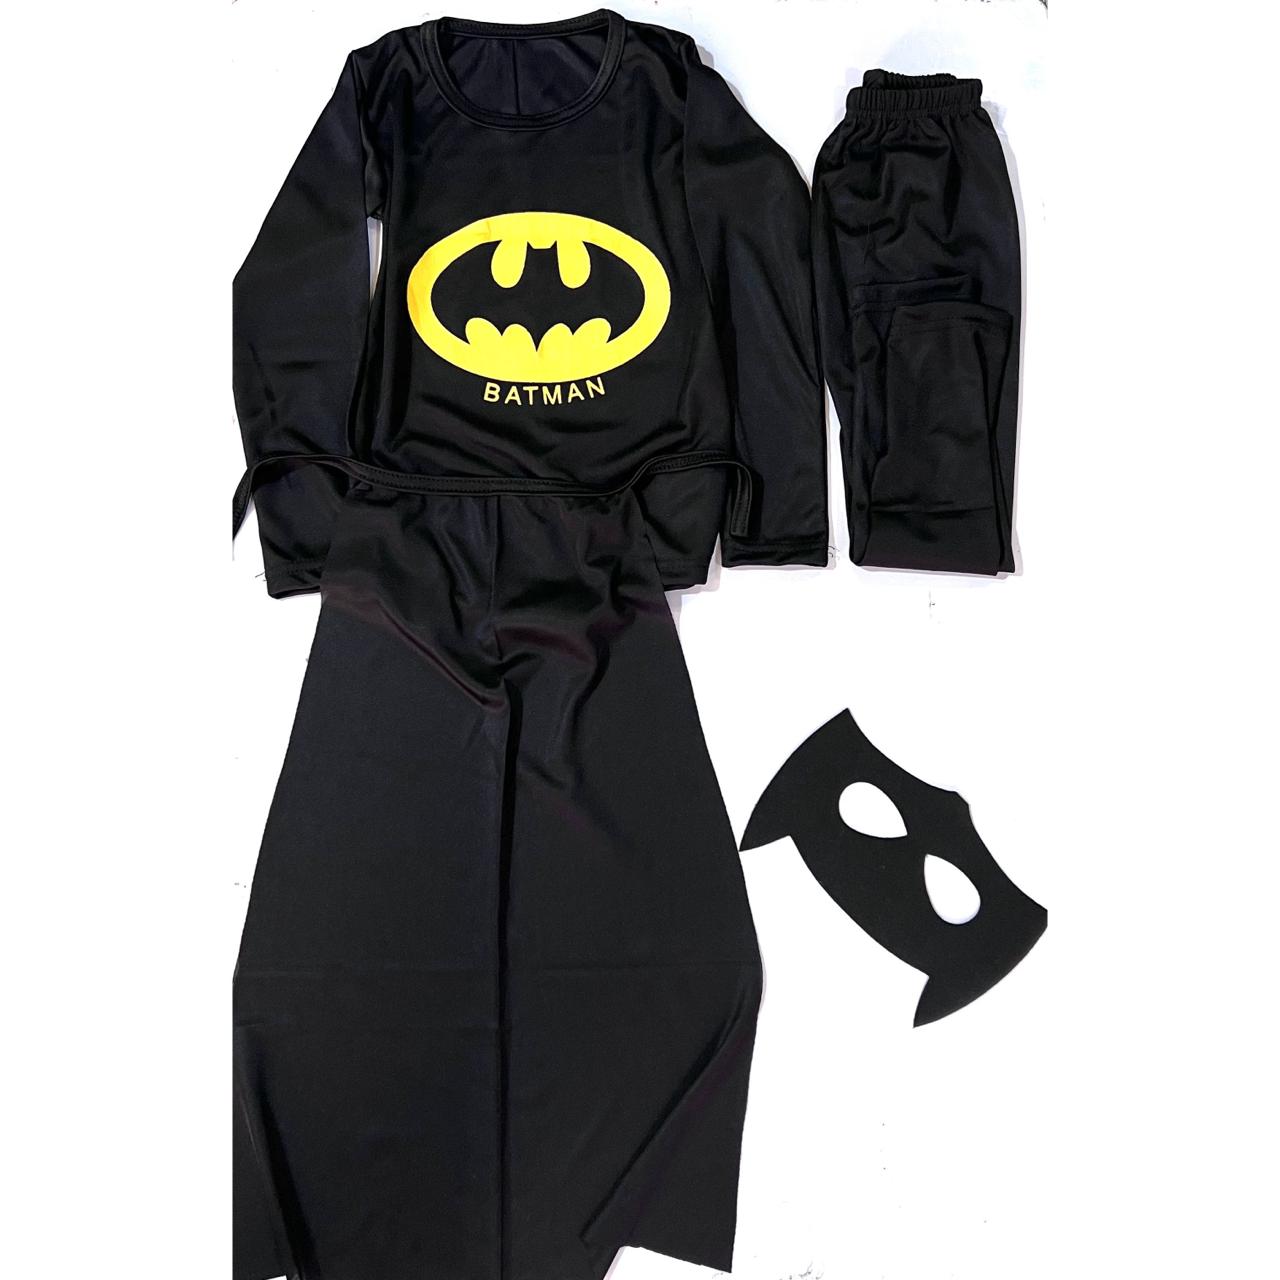 Batman cloth for the child 1-10 year